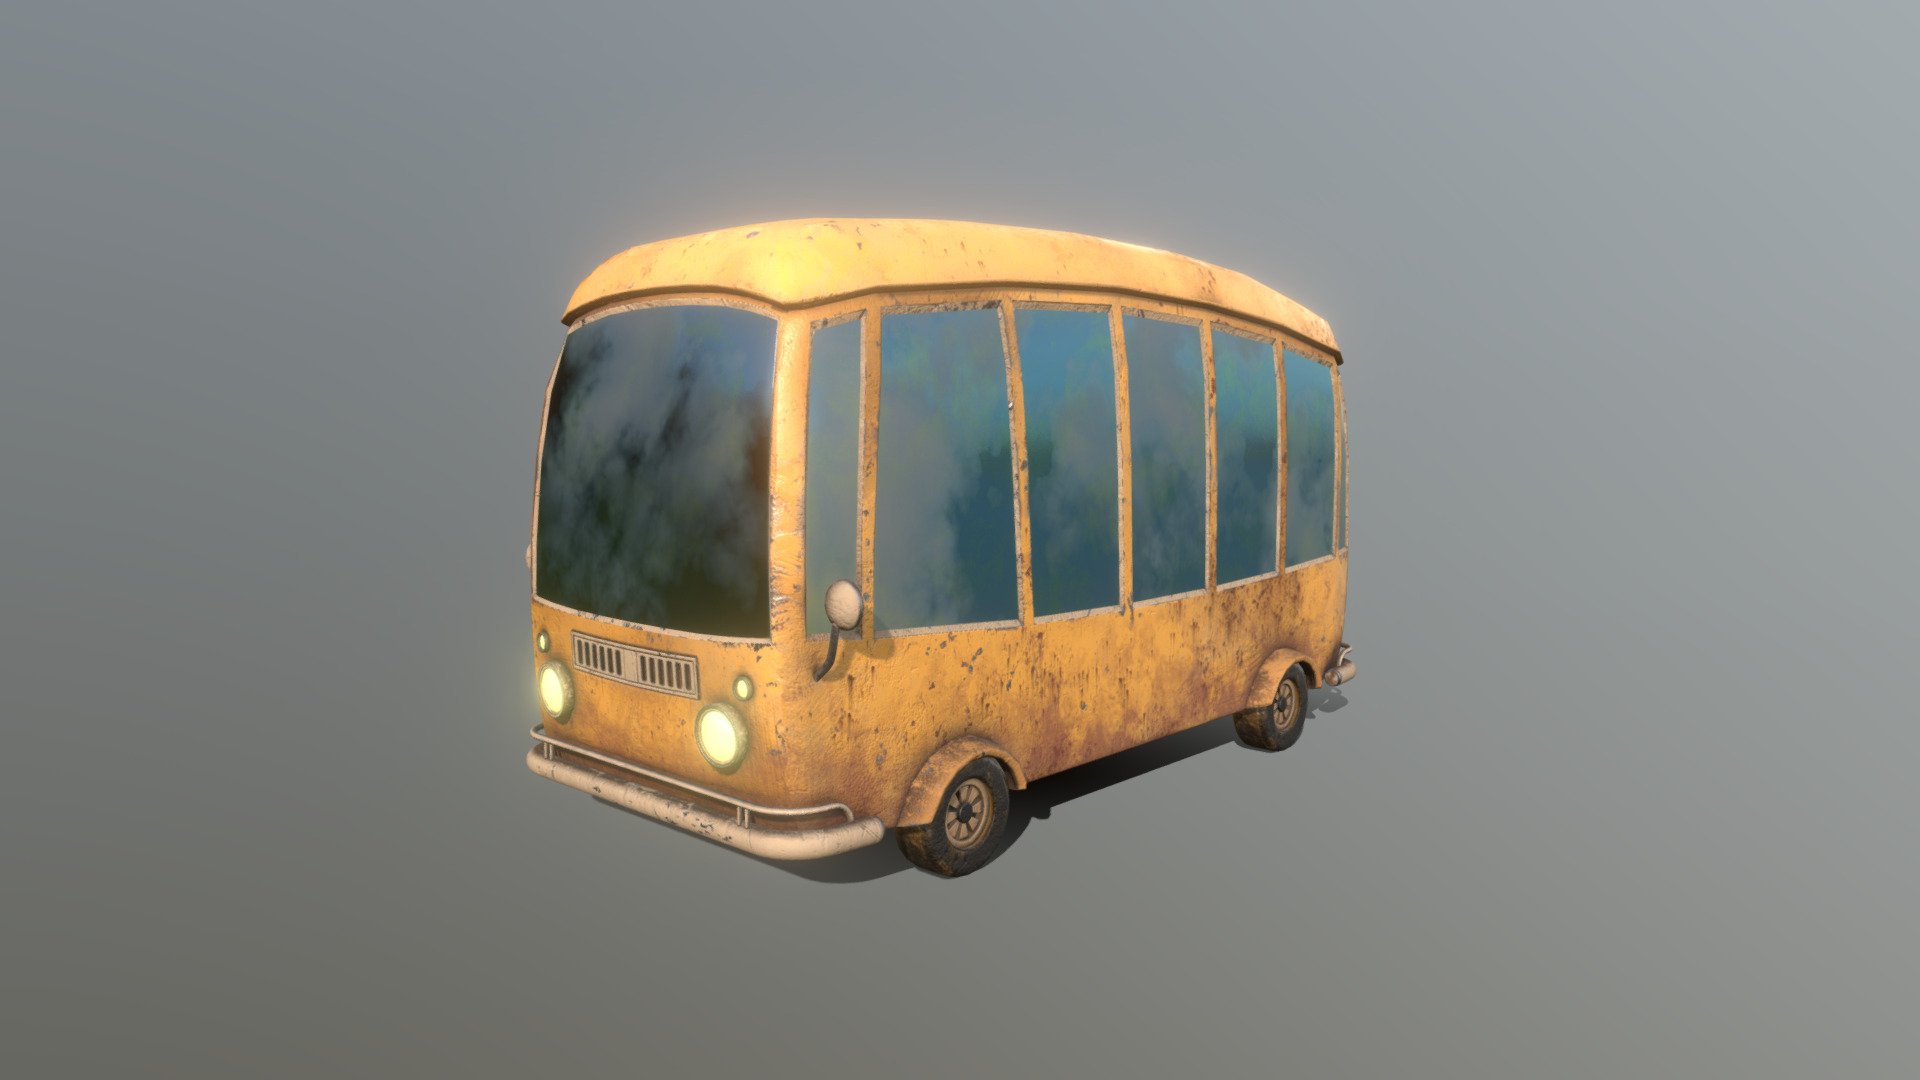 Rusty stylized cartoony bus/van model made in 3ds Max 2022 and textured in Substance Painter. Model has 12310 polygons and 12395 vertices. 




Model pack contains .fbx / .max / .blend and .obj file formats. Textures aren’t embedded into each format and have to be plugged in manually. Fbx files are provided for 2014/2015, 2016/2017 and 2020 versions

Wheels pairs and axis share same texture set (overlapping UVs)

Model is centered to the middle of its bottom part and placed to 0.0.0 scene coordinates

Textures come in a single 4k UV set

Texture pack contains .png textures optimized for Arnold, Vray, Corona, UnityHDmetal + .png/.jpeg and .targa files optimized for UE4

Nothing is animated

Everything is named properly

Model contains overlapping geometry and small parts which may cause z-fighting under certain circumstances

Make sure to contact me if you want more details or some minor adaptations to the model.

As usual: best wishes and have a nice day!:D - Stylized Cartoon Bus / Van - 3D model by Art-Teeves 3d model